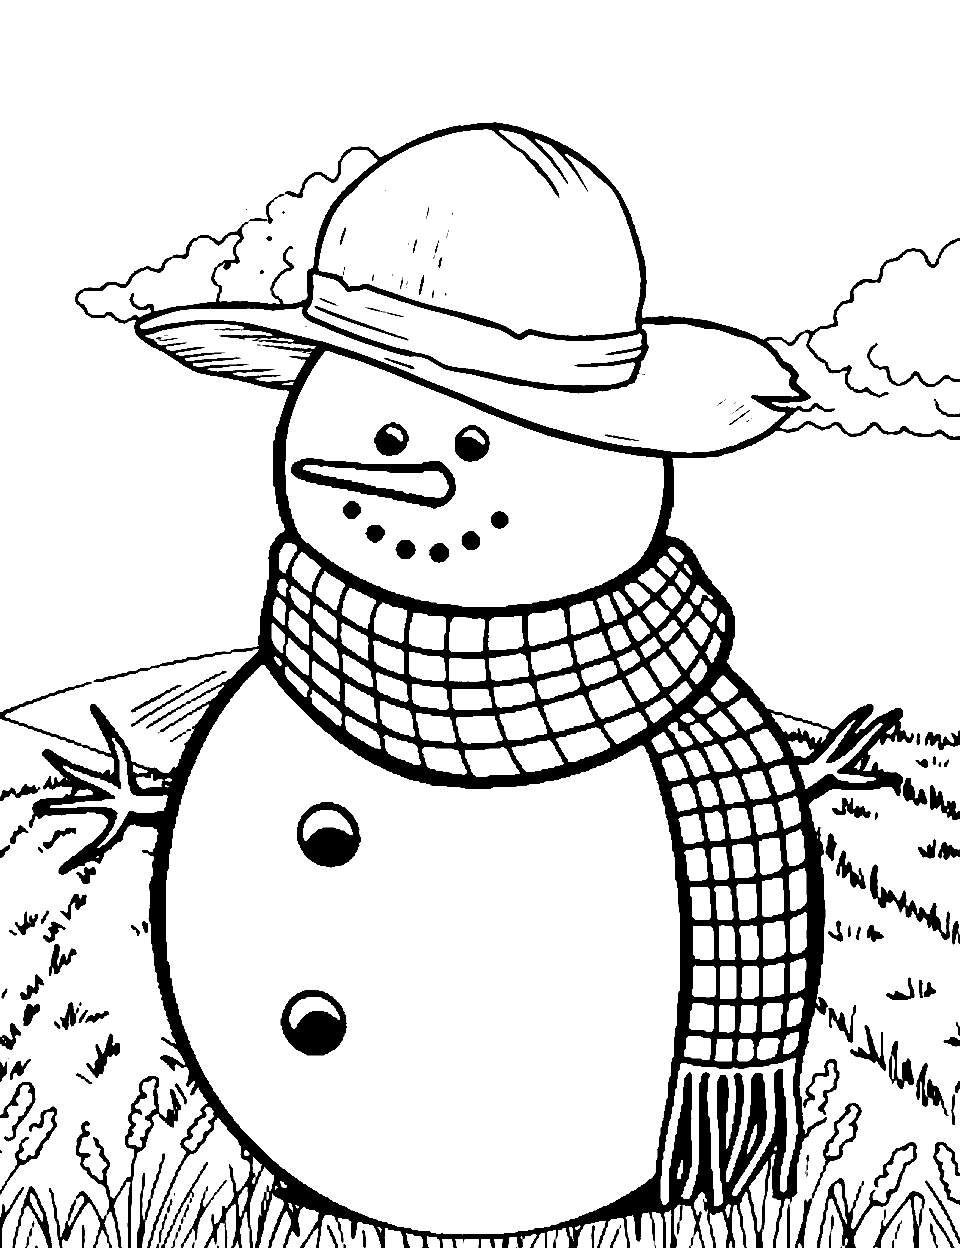 Snowman Farmer in a Field Coloring Page - A snowman with a straw hat, standing in a field.